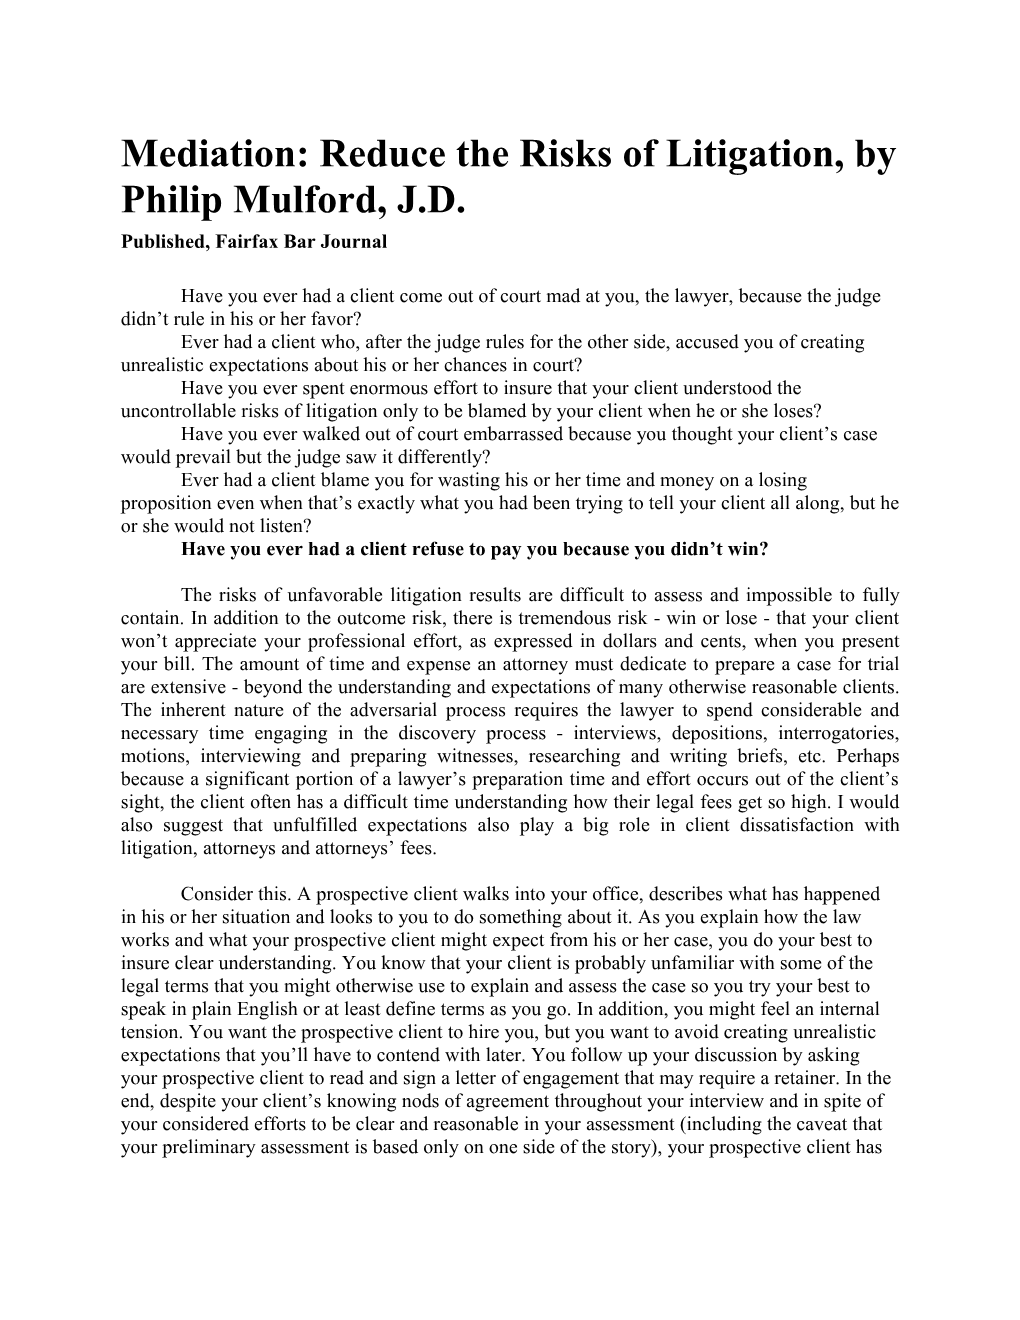 Mediation: Reduce the Risks of Litigation, by Philip Mulford, J.D